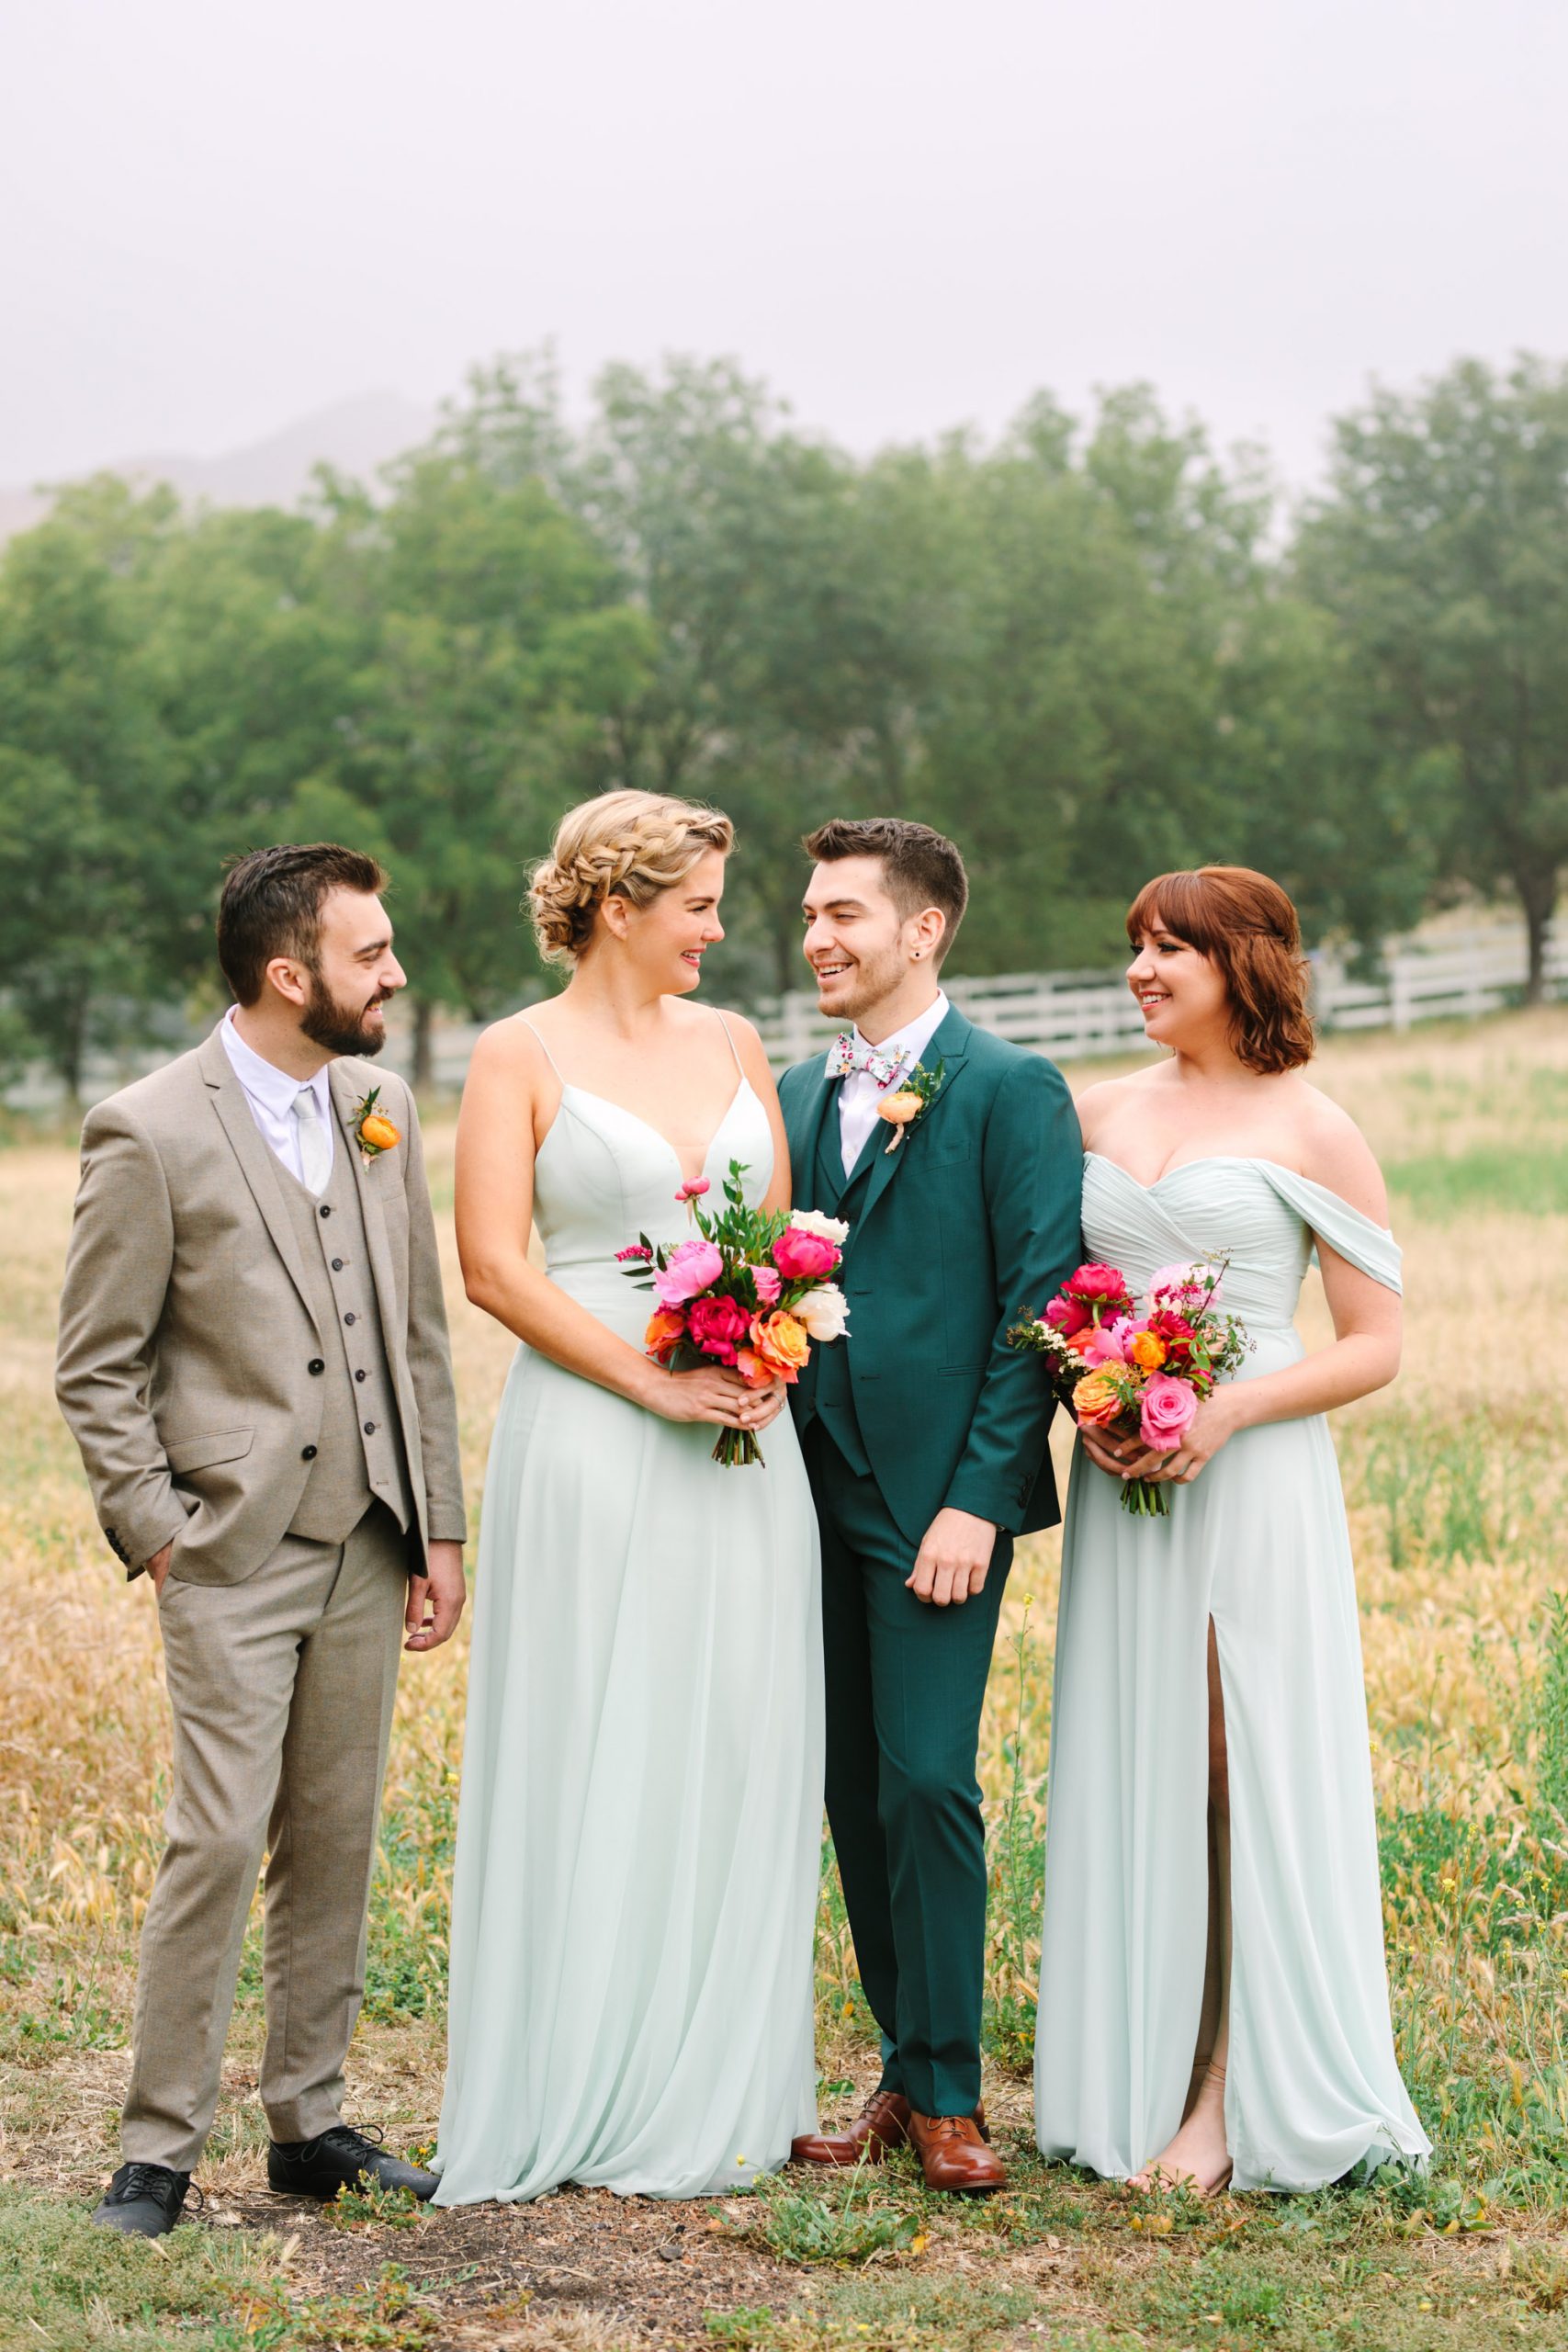 Mint green wedding party by Mary Costa Photography